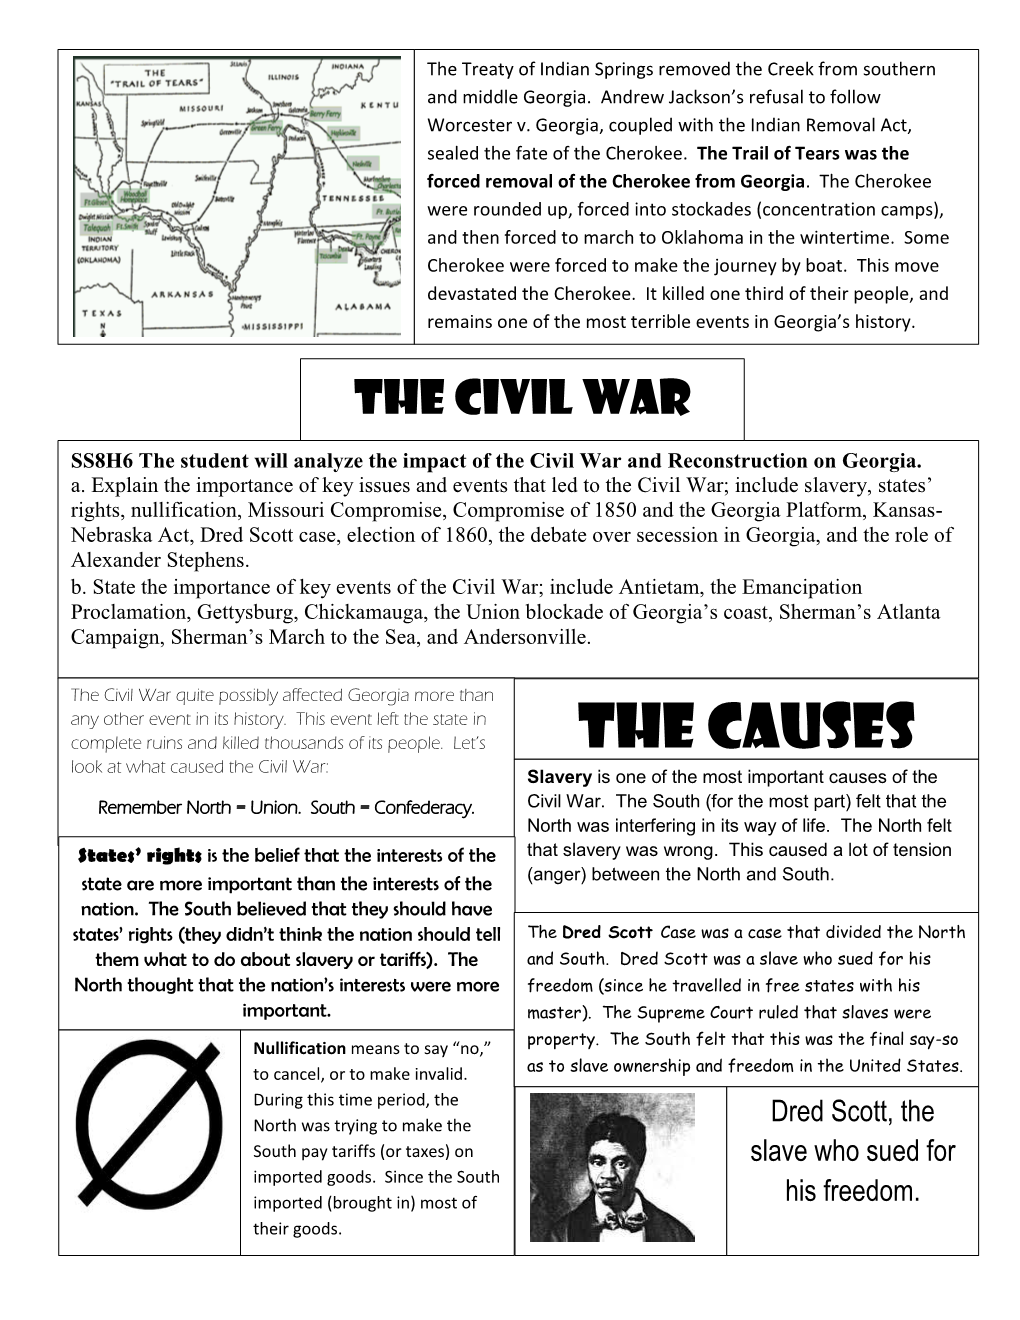 The Causes Look at What Caused the Civil War: Slavery Is One of the Most Important Causes of the Remember North = Union